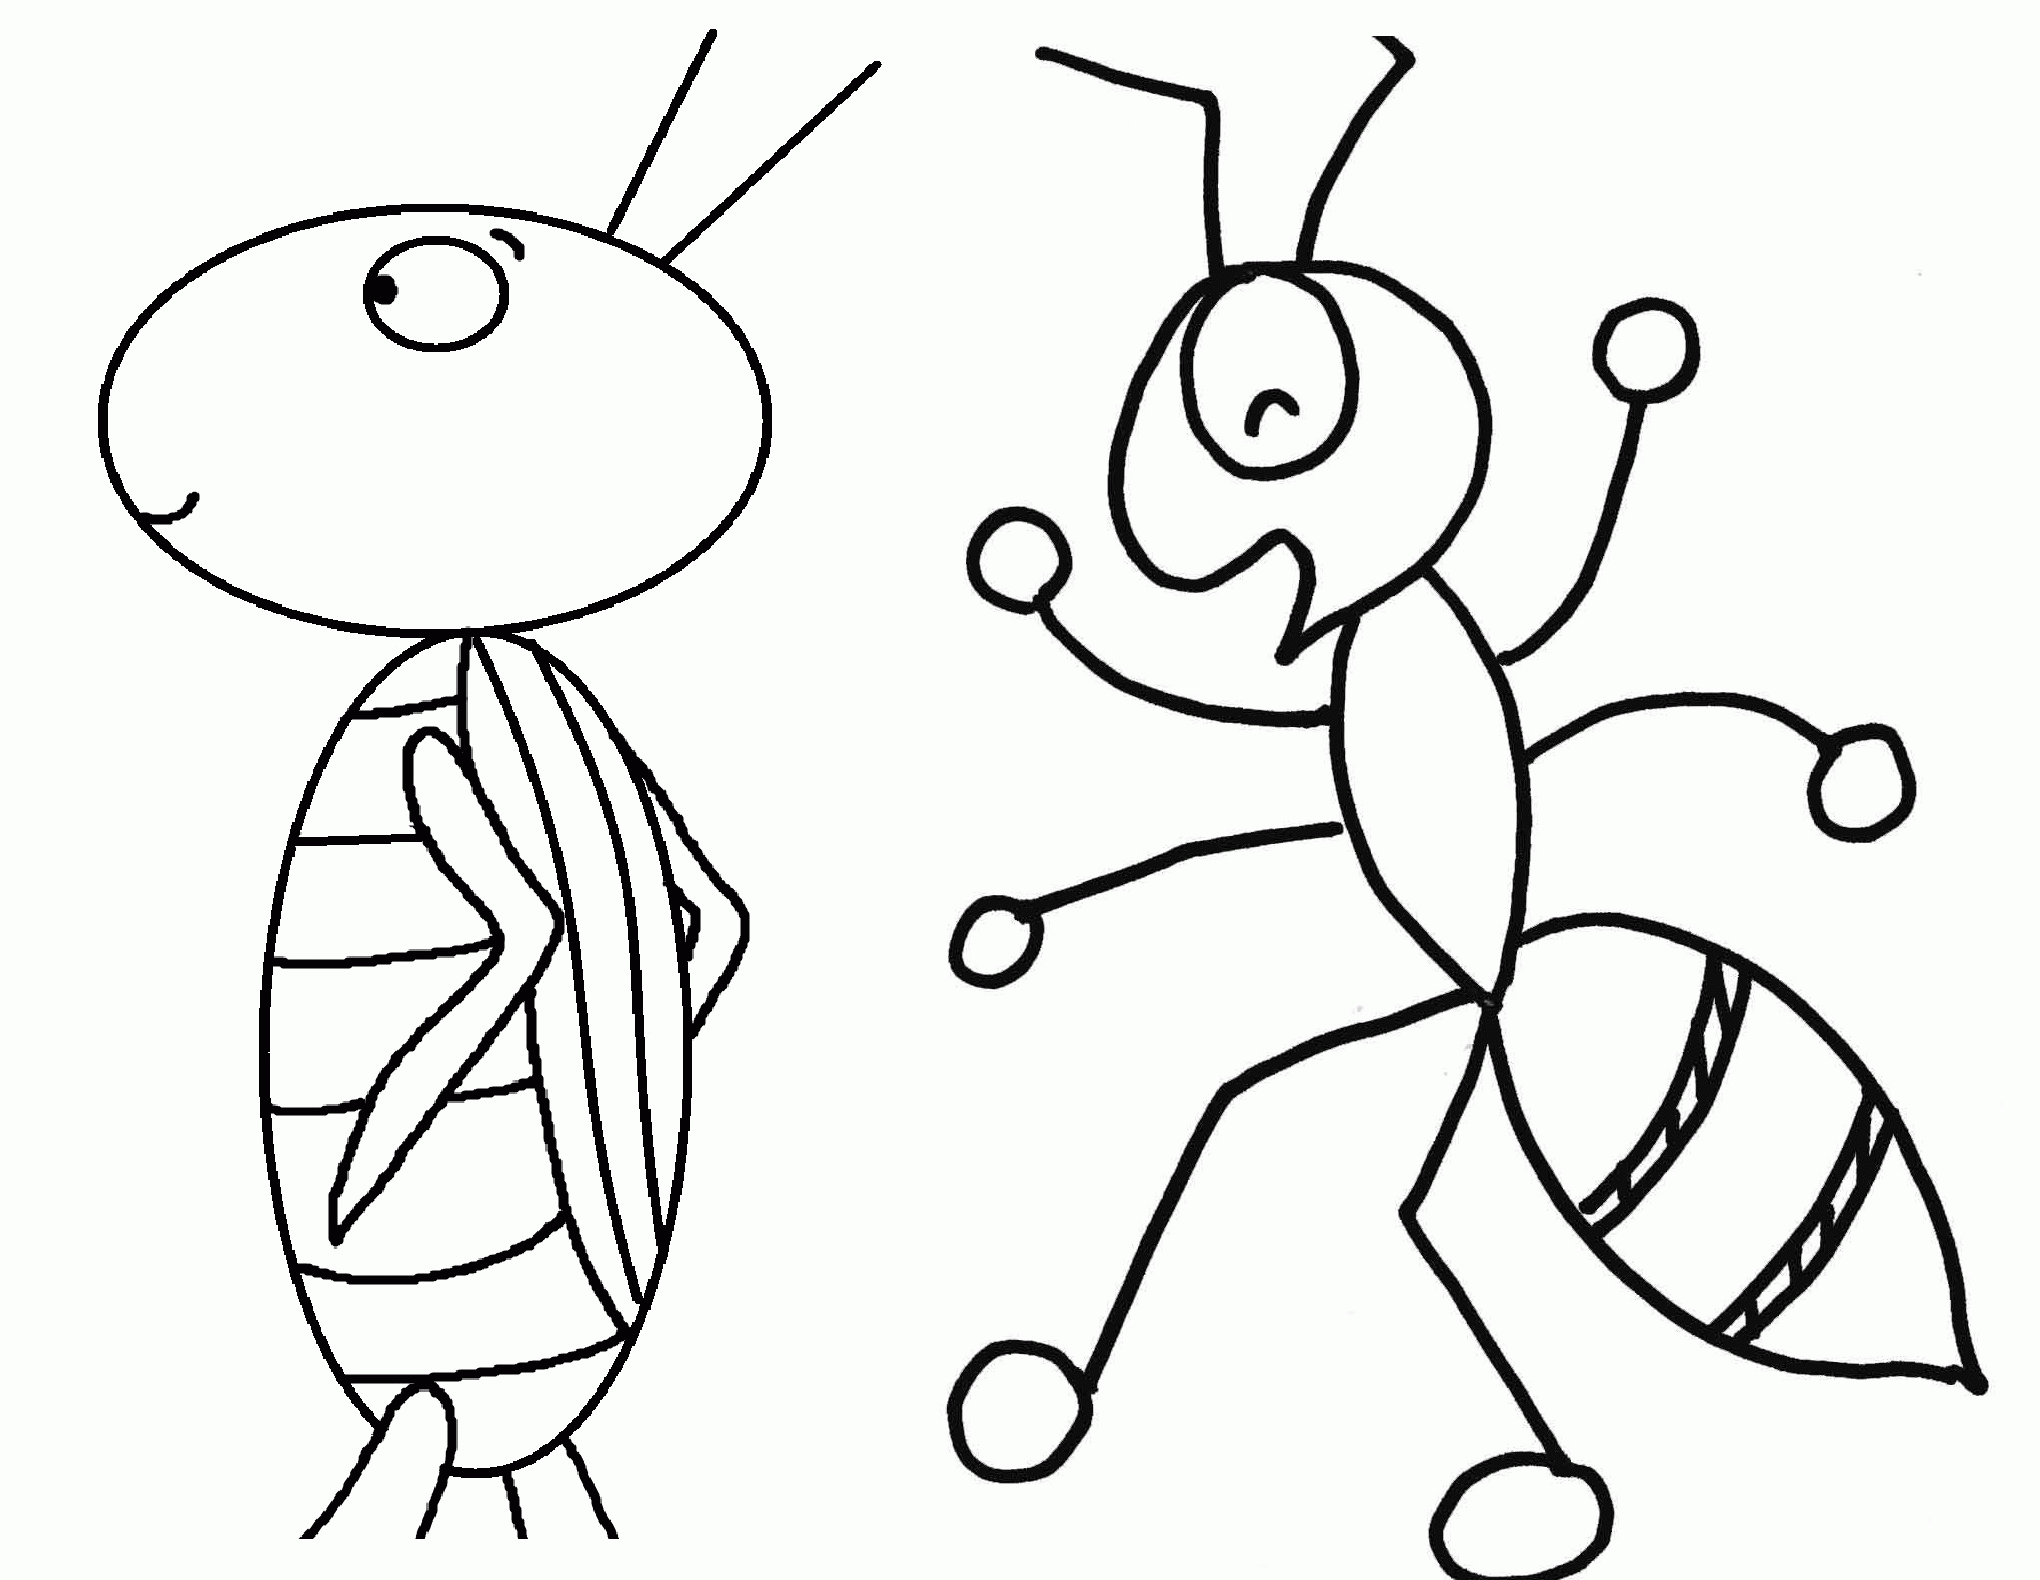 Free Printable Grasshopper Coloring Page - Coloring pages